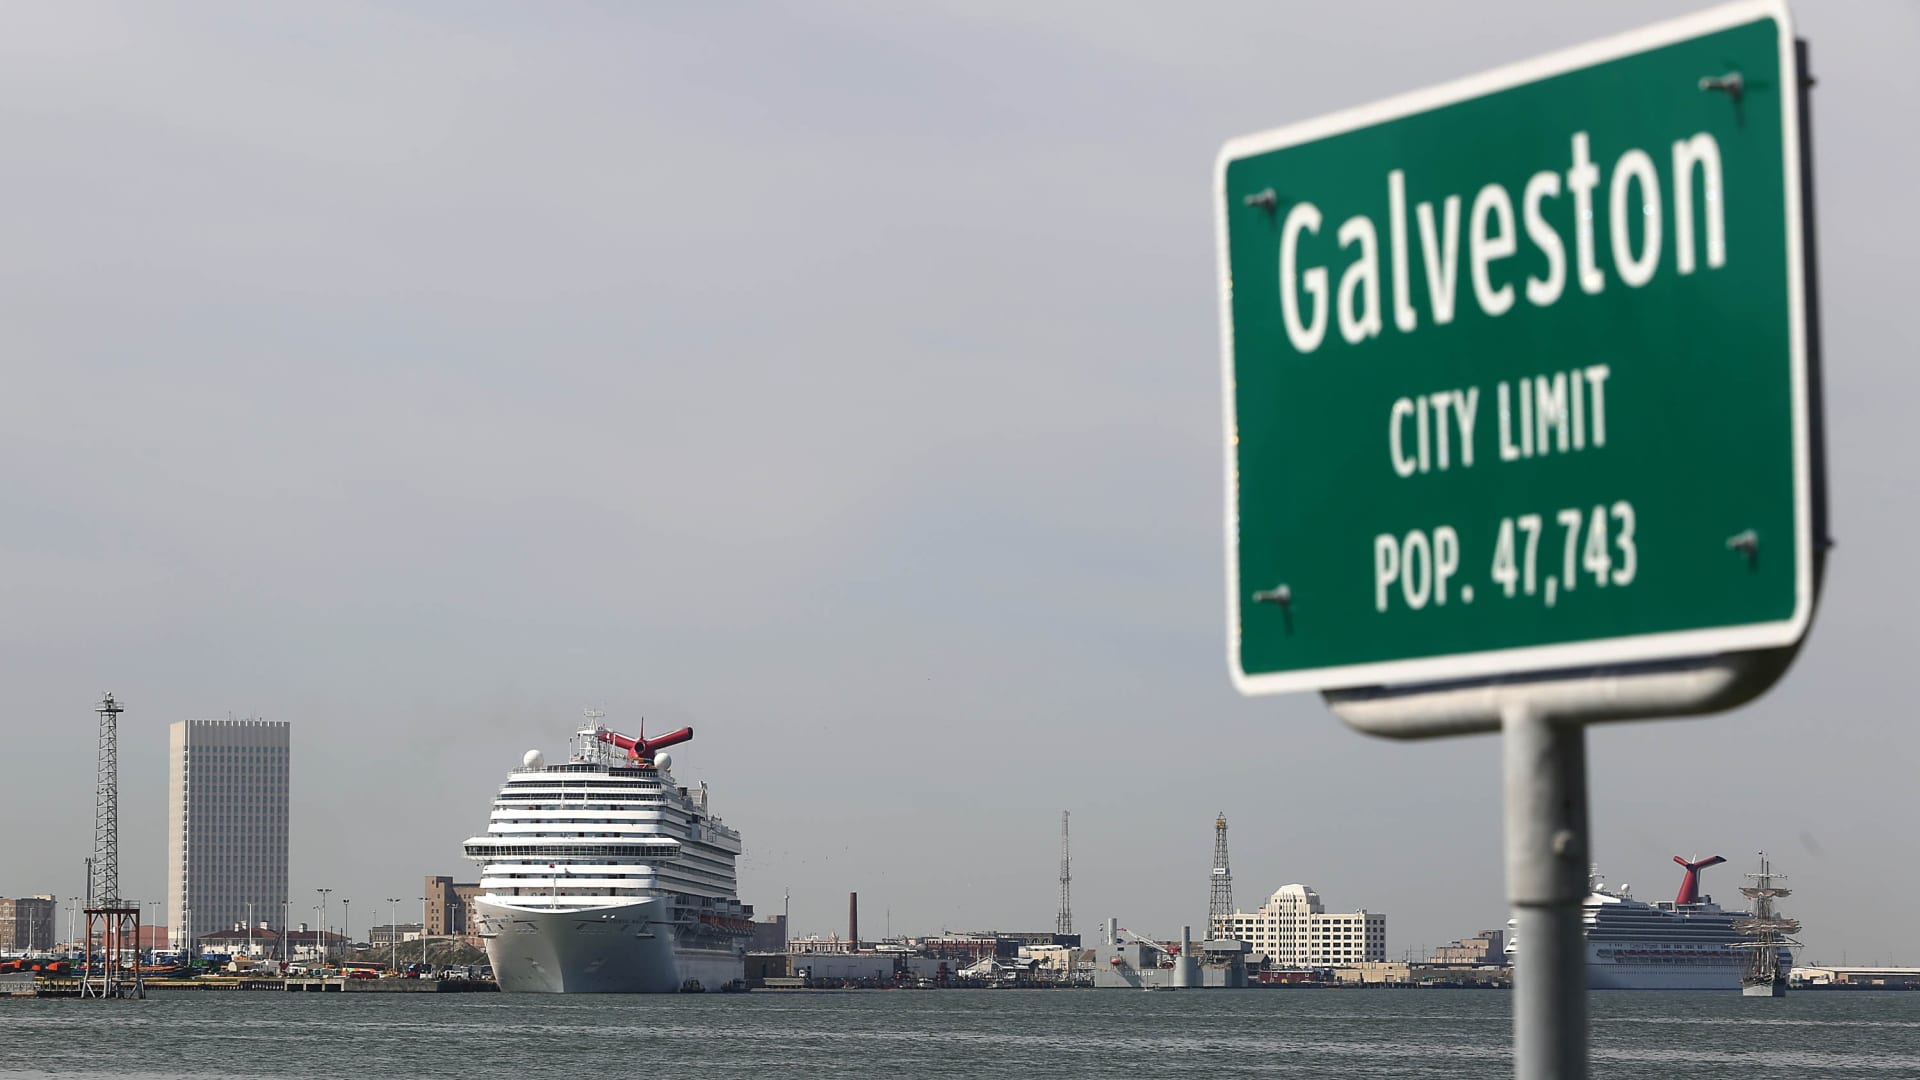 Lois Lindsey said she, her daughter and eldest grandchild decided to get vaccinated to go on a cruise departing this winter from Galveston, Texas.